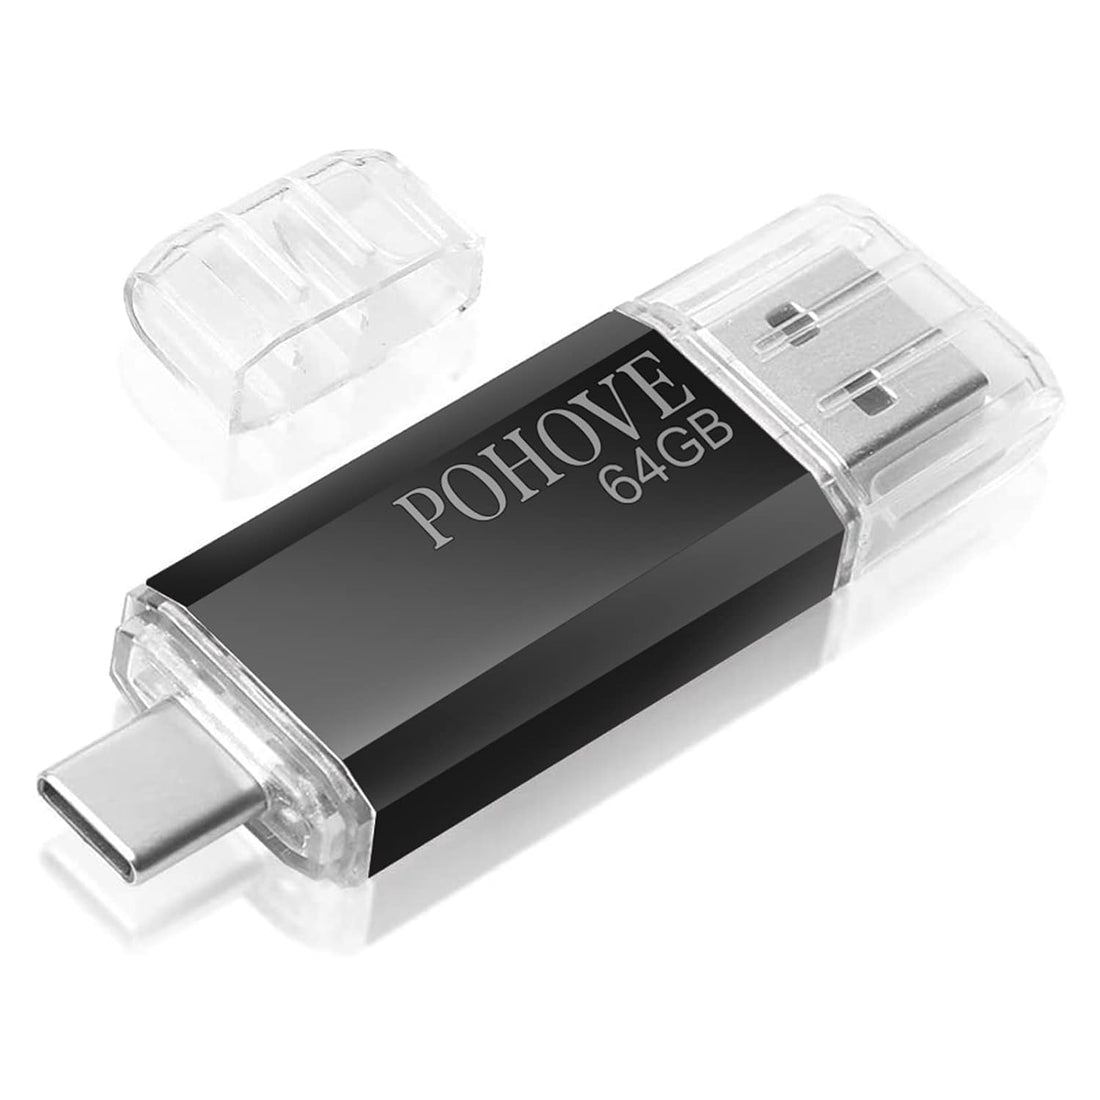 POHOVE USB C Memory Stick 64GB Type C USB Flash Drive 64GB 2-in-1 OTG Pen Drive 64 GB USB Key Compatible with Samsung Huawei Oneplus Android Smartphone MacBook PC Tablets (Black)